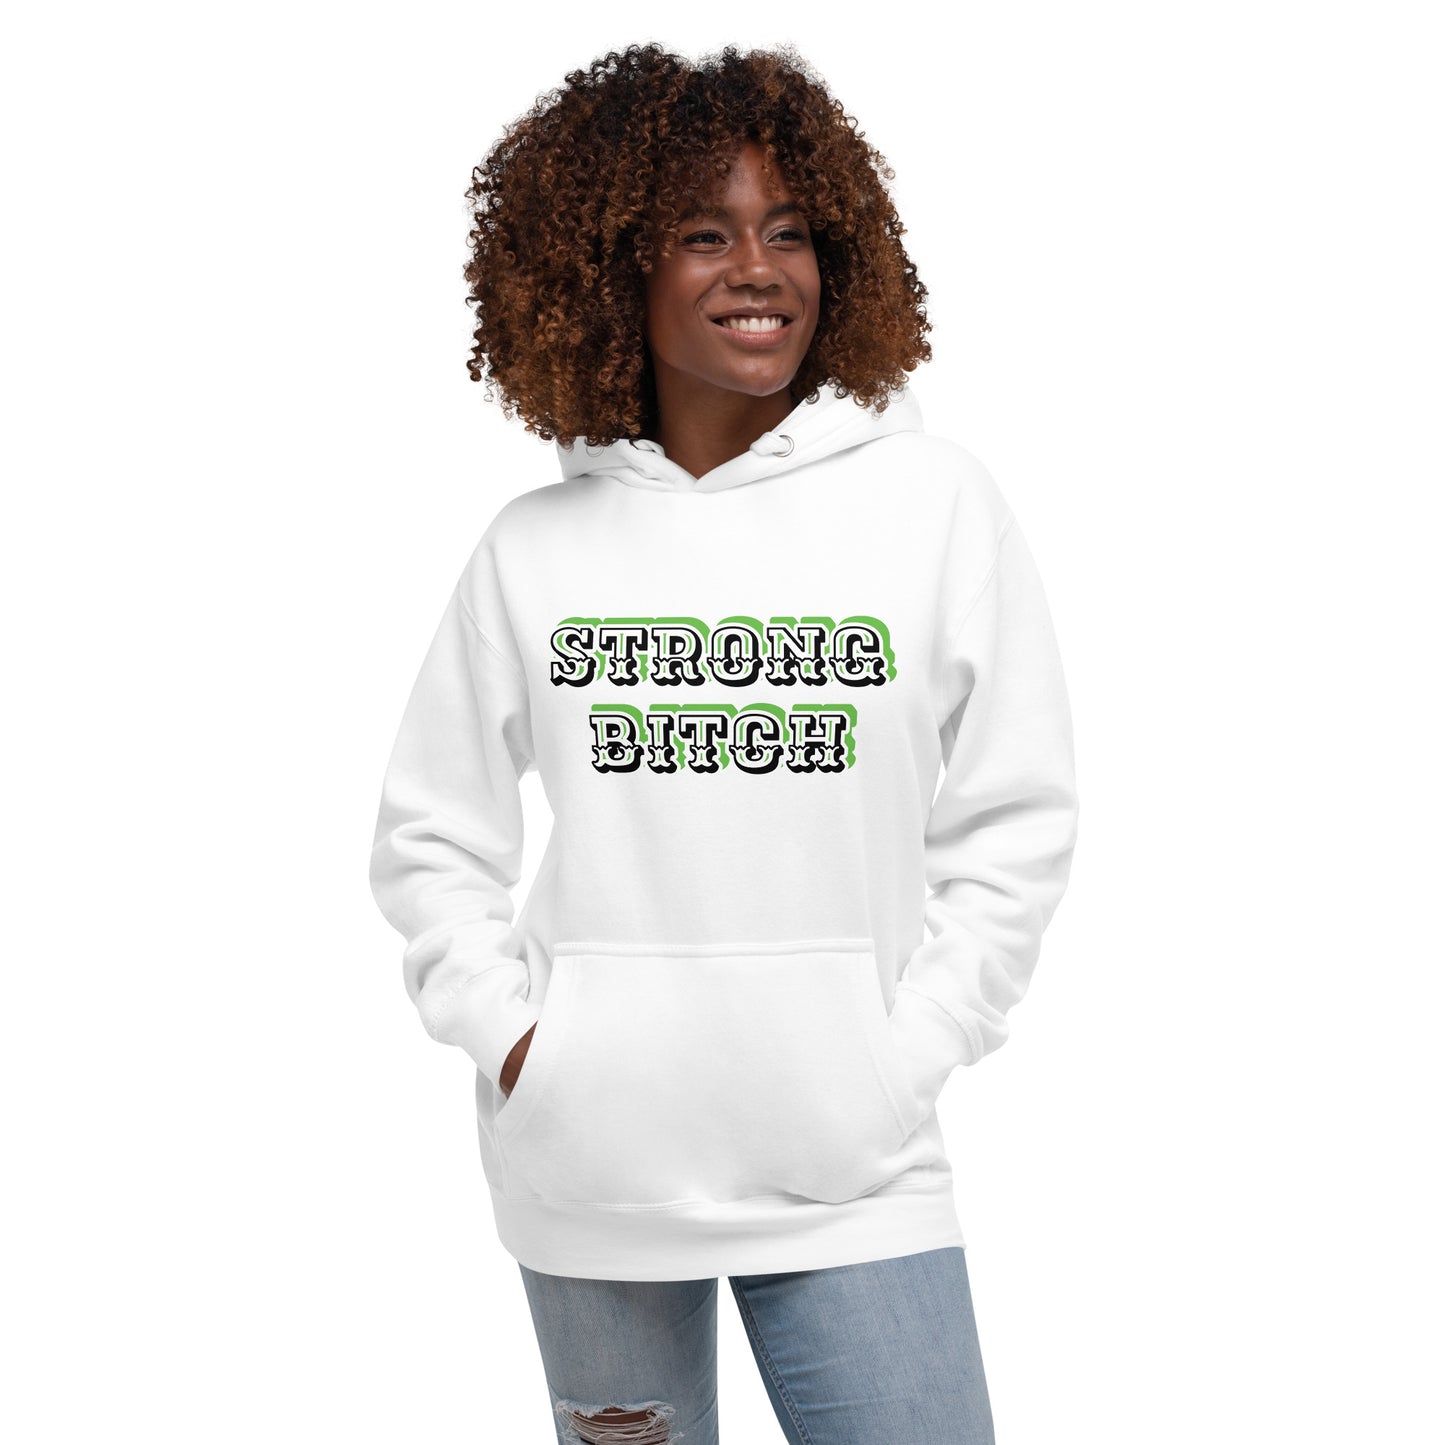 Strong Bitch Hoodie